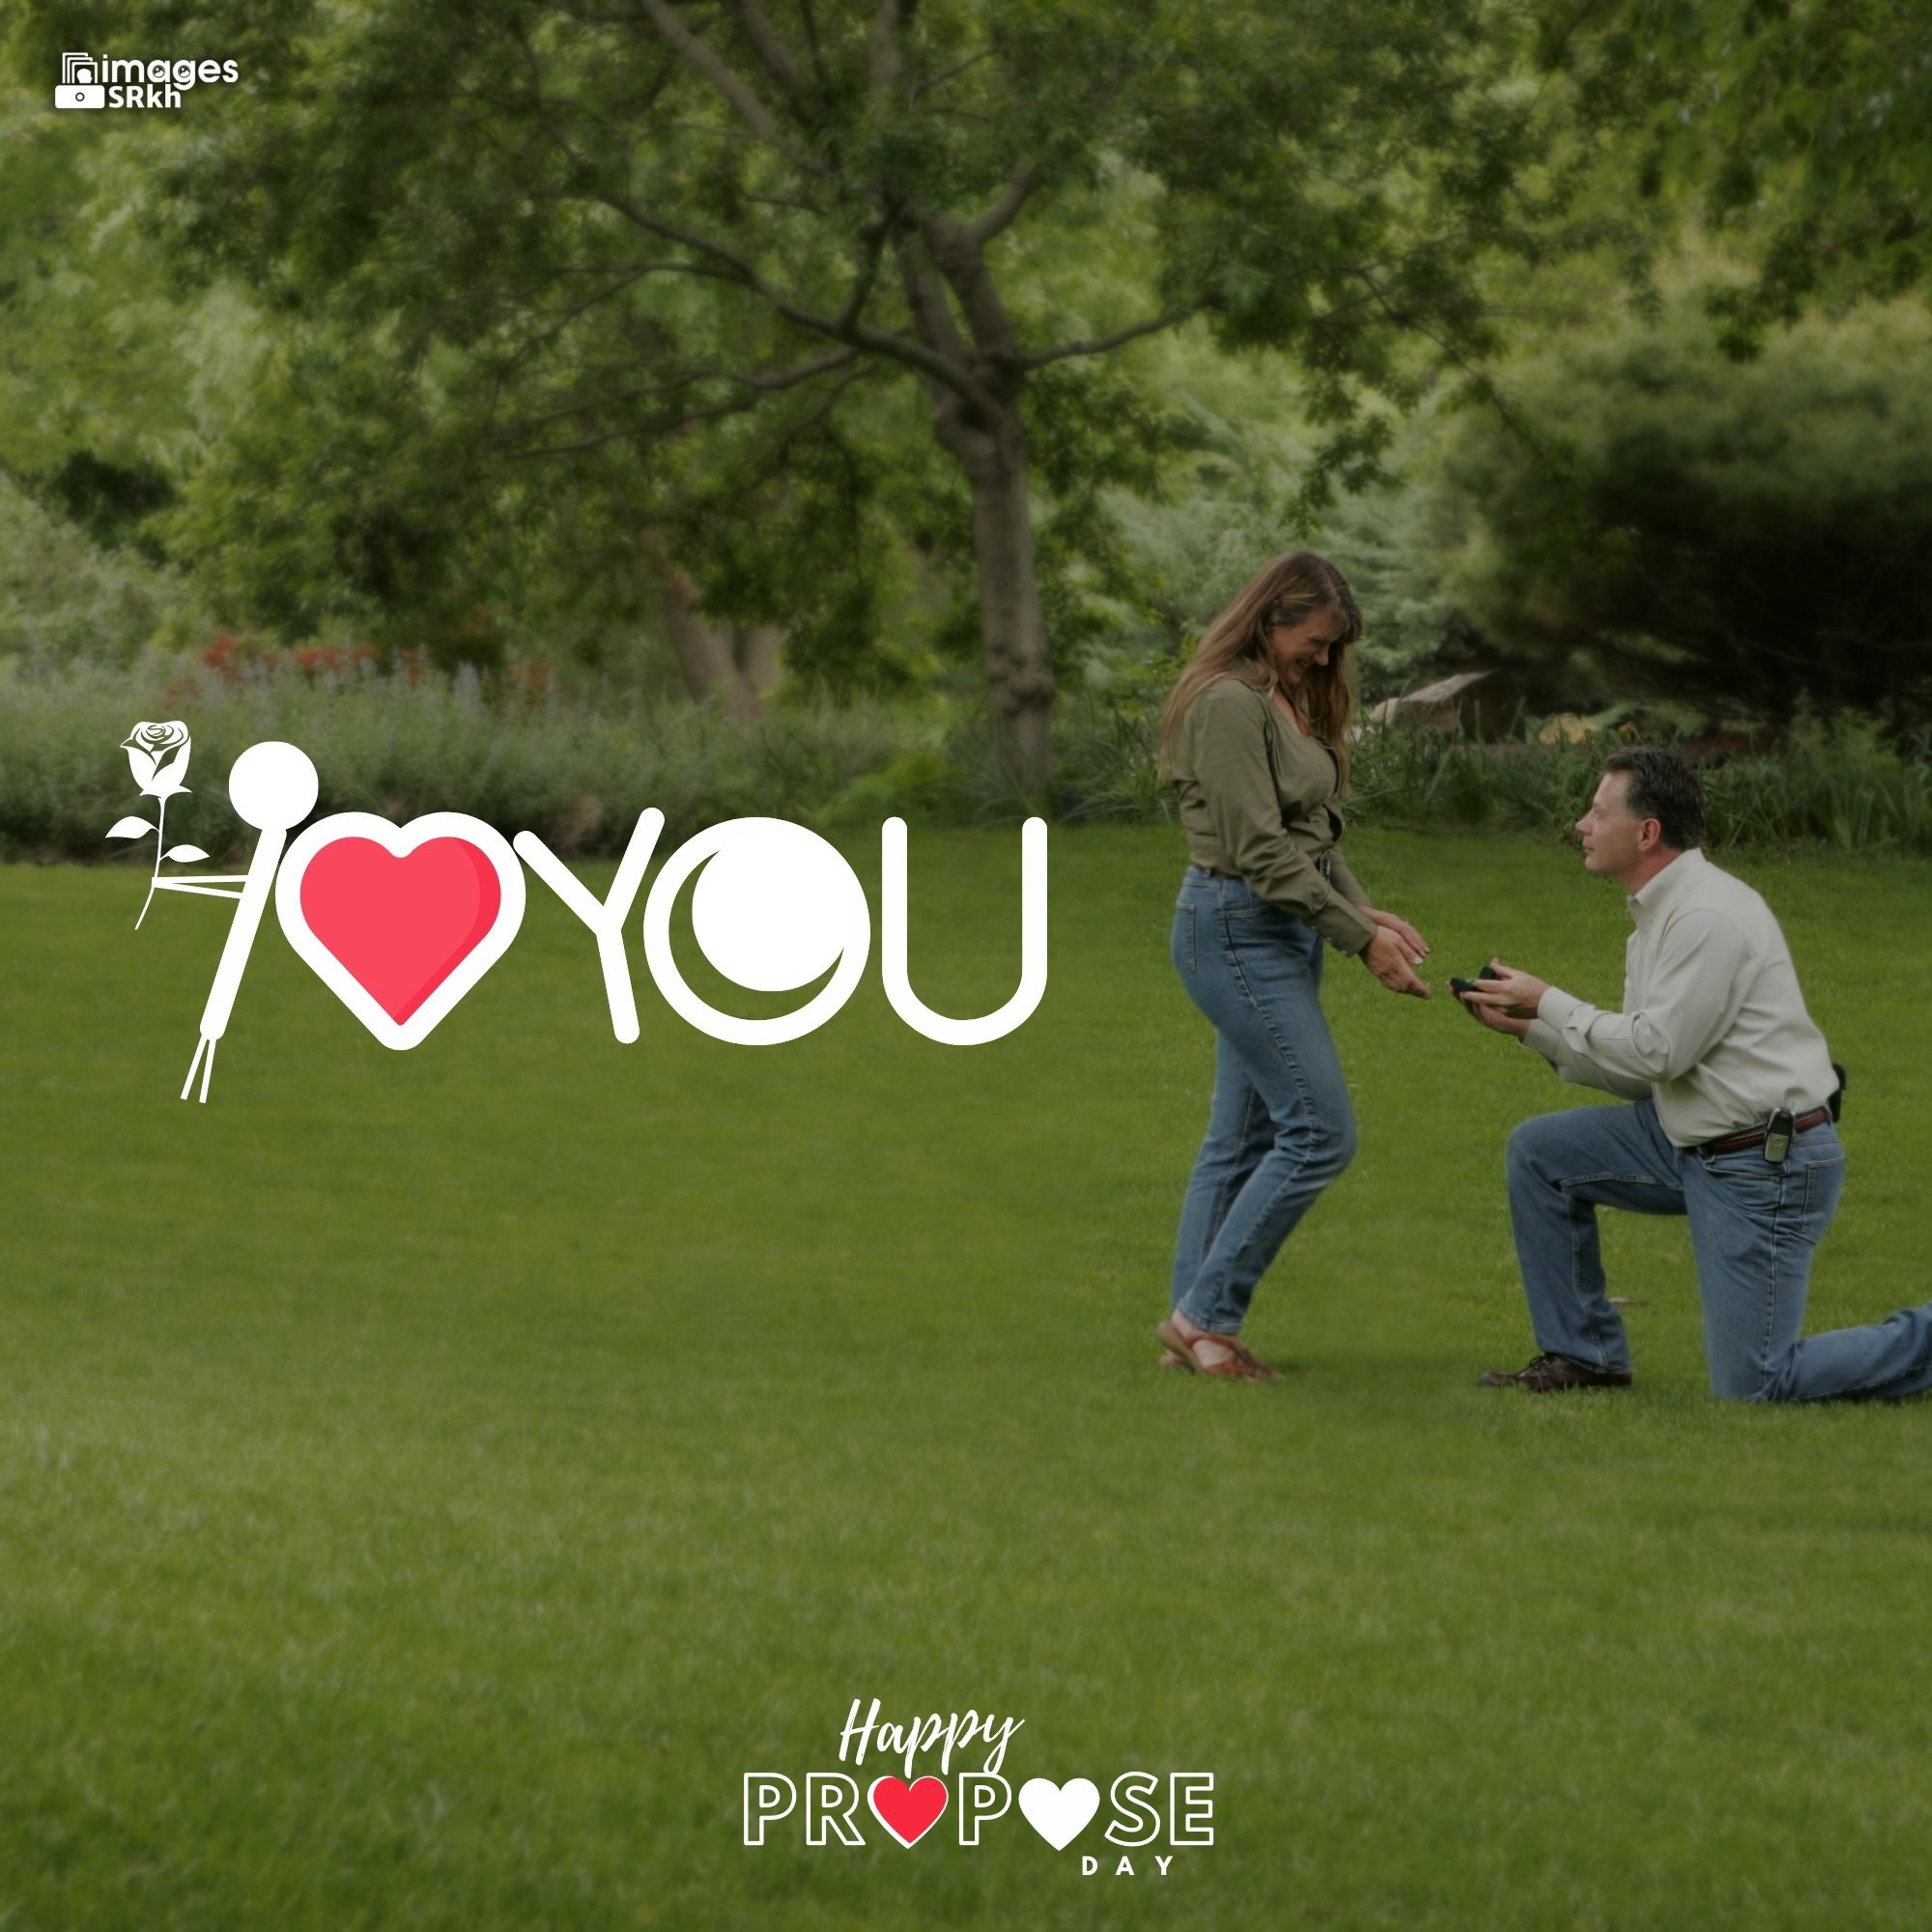 Happy Propose Day Images | 321 | I LOVE YOU